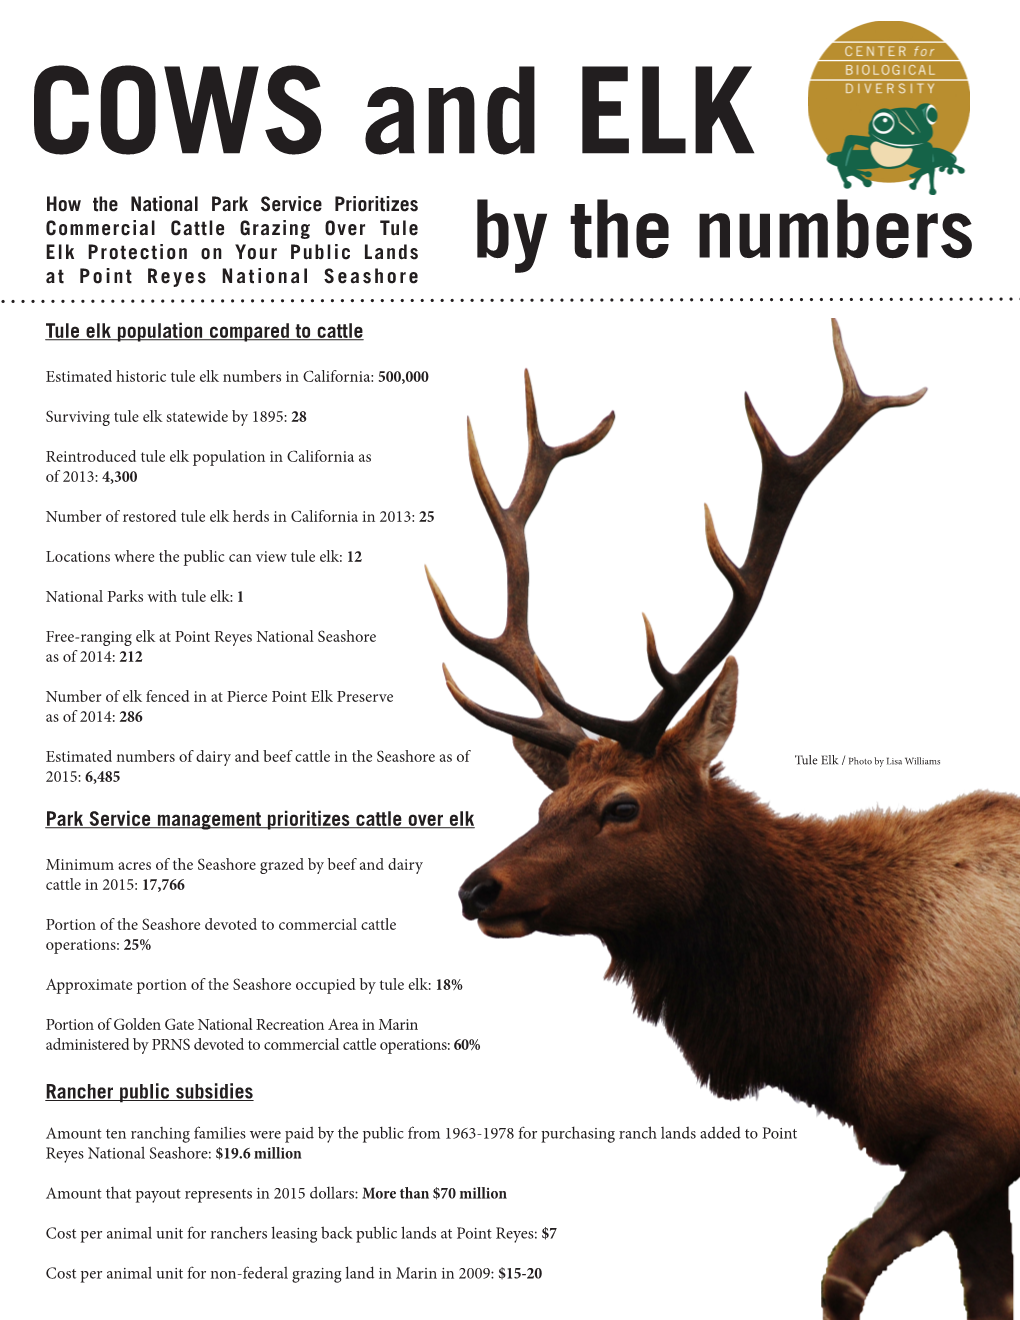 Cows and Elk by the Numbers